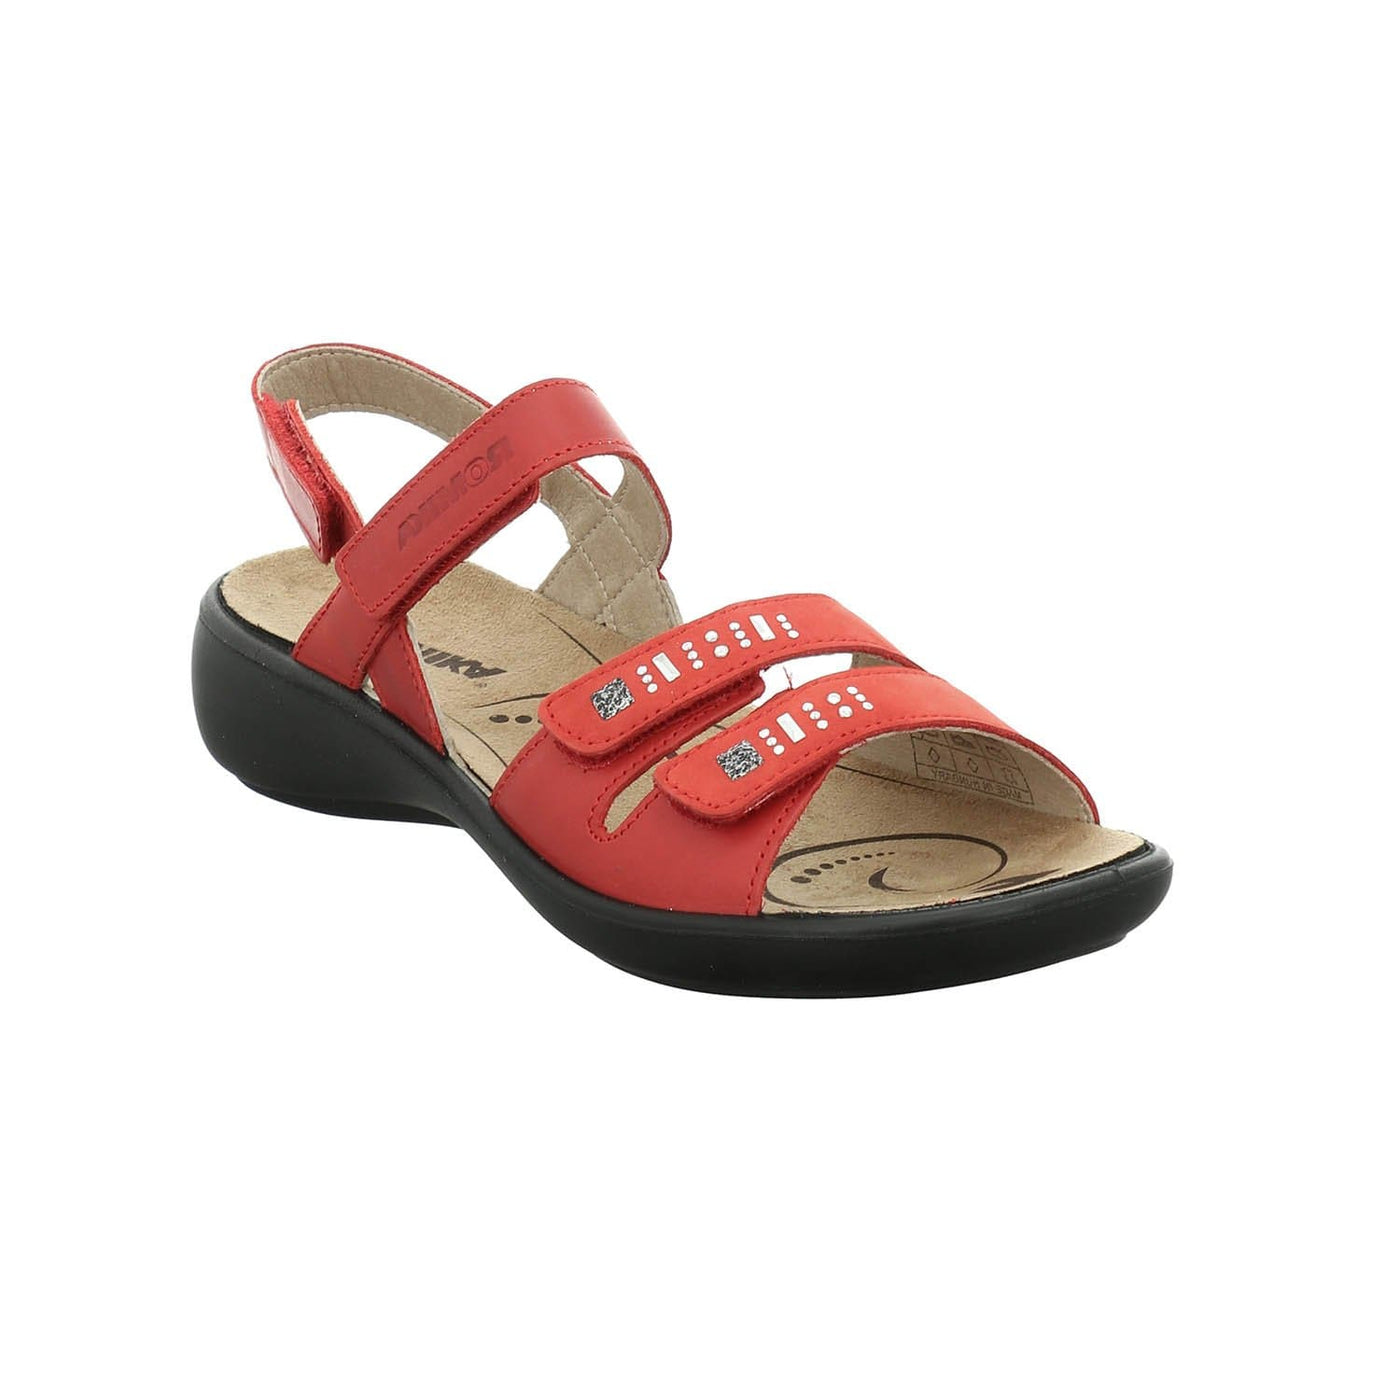 Romika Ibiza 86 | Chaussures confortables - 35 / Rouge - Sandales dame